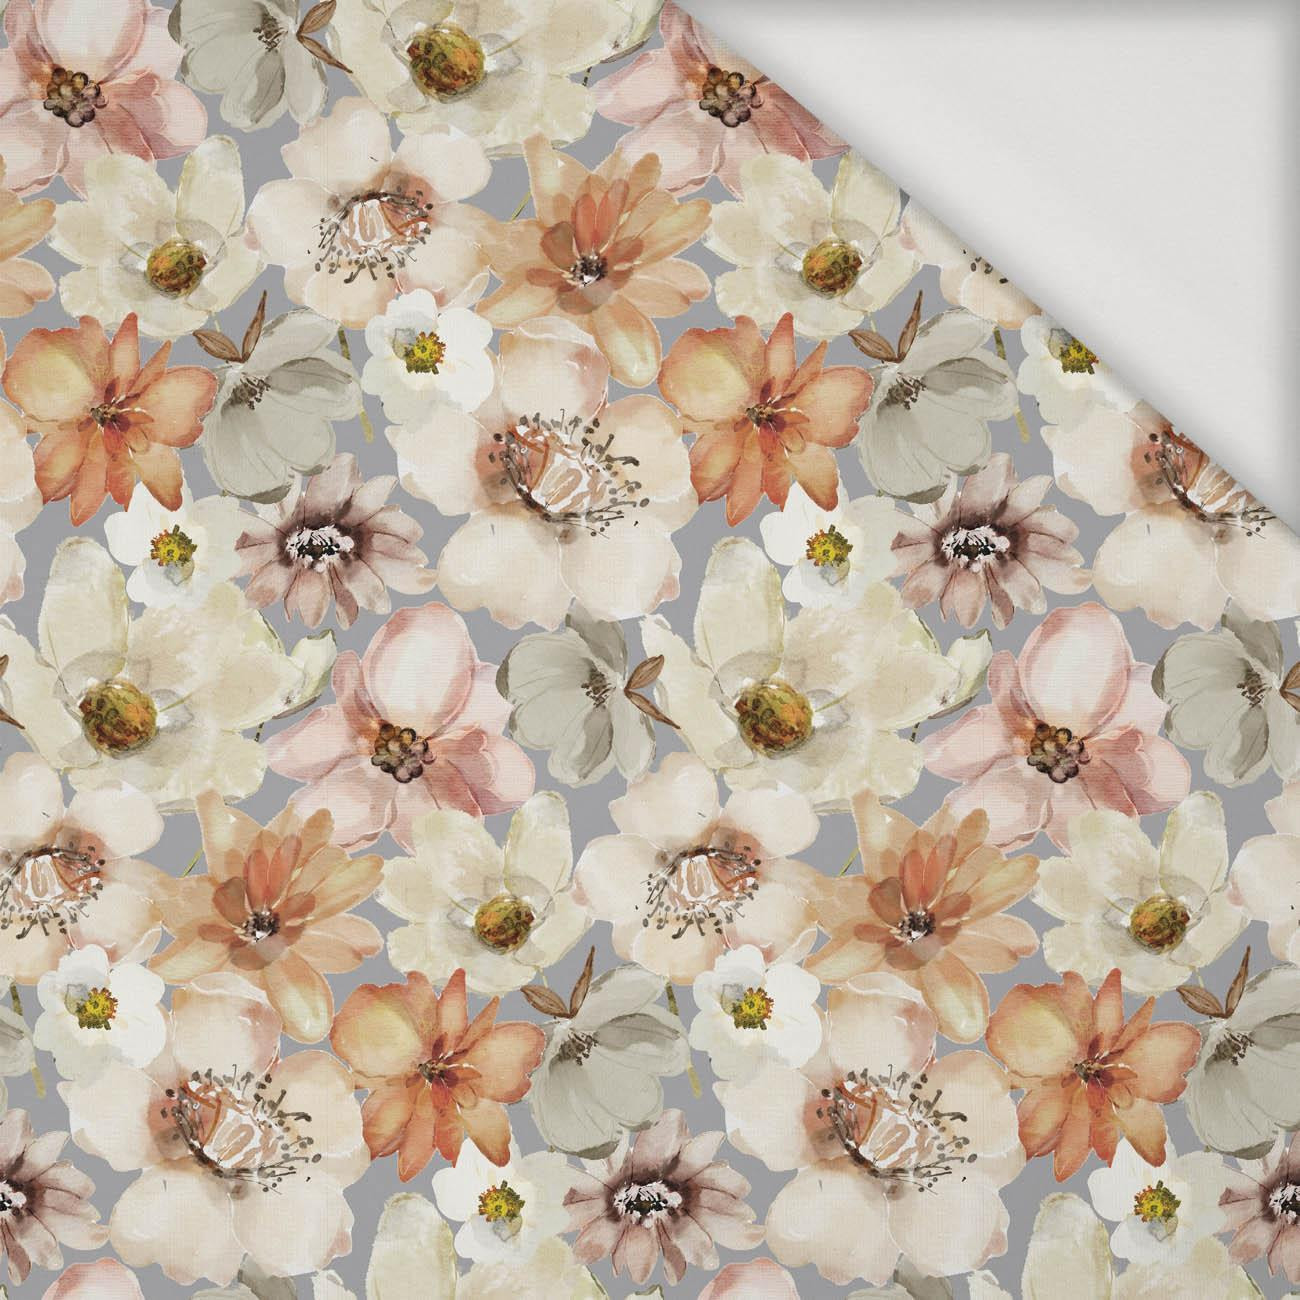 WATER-COLOR FLOWERS pat. 4 - Cotton woven fabric